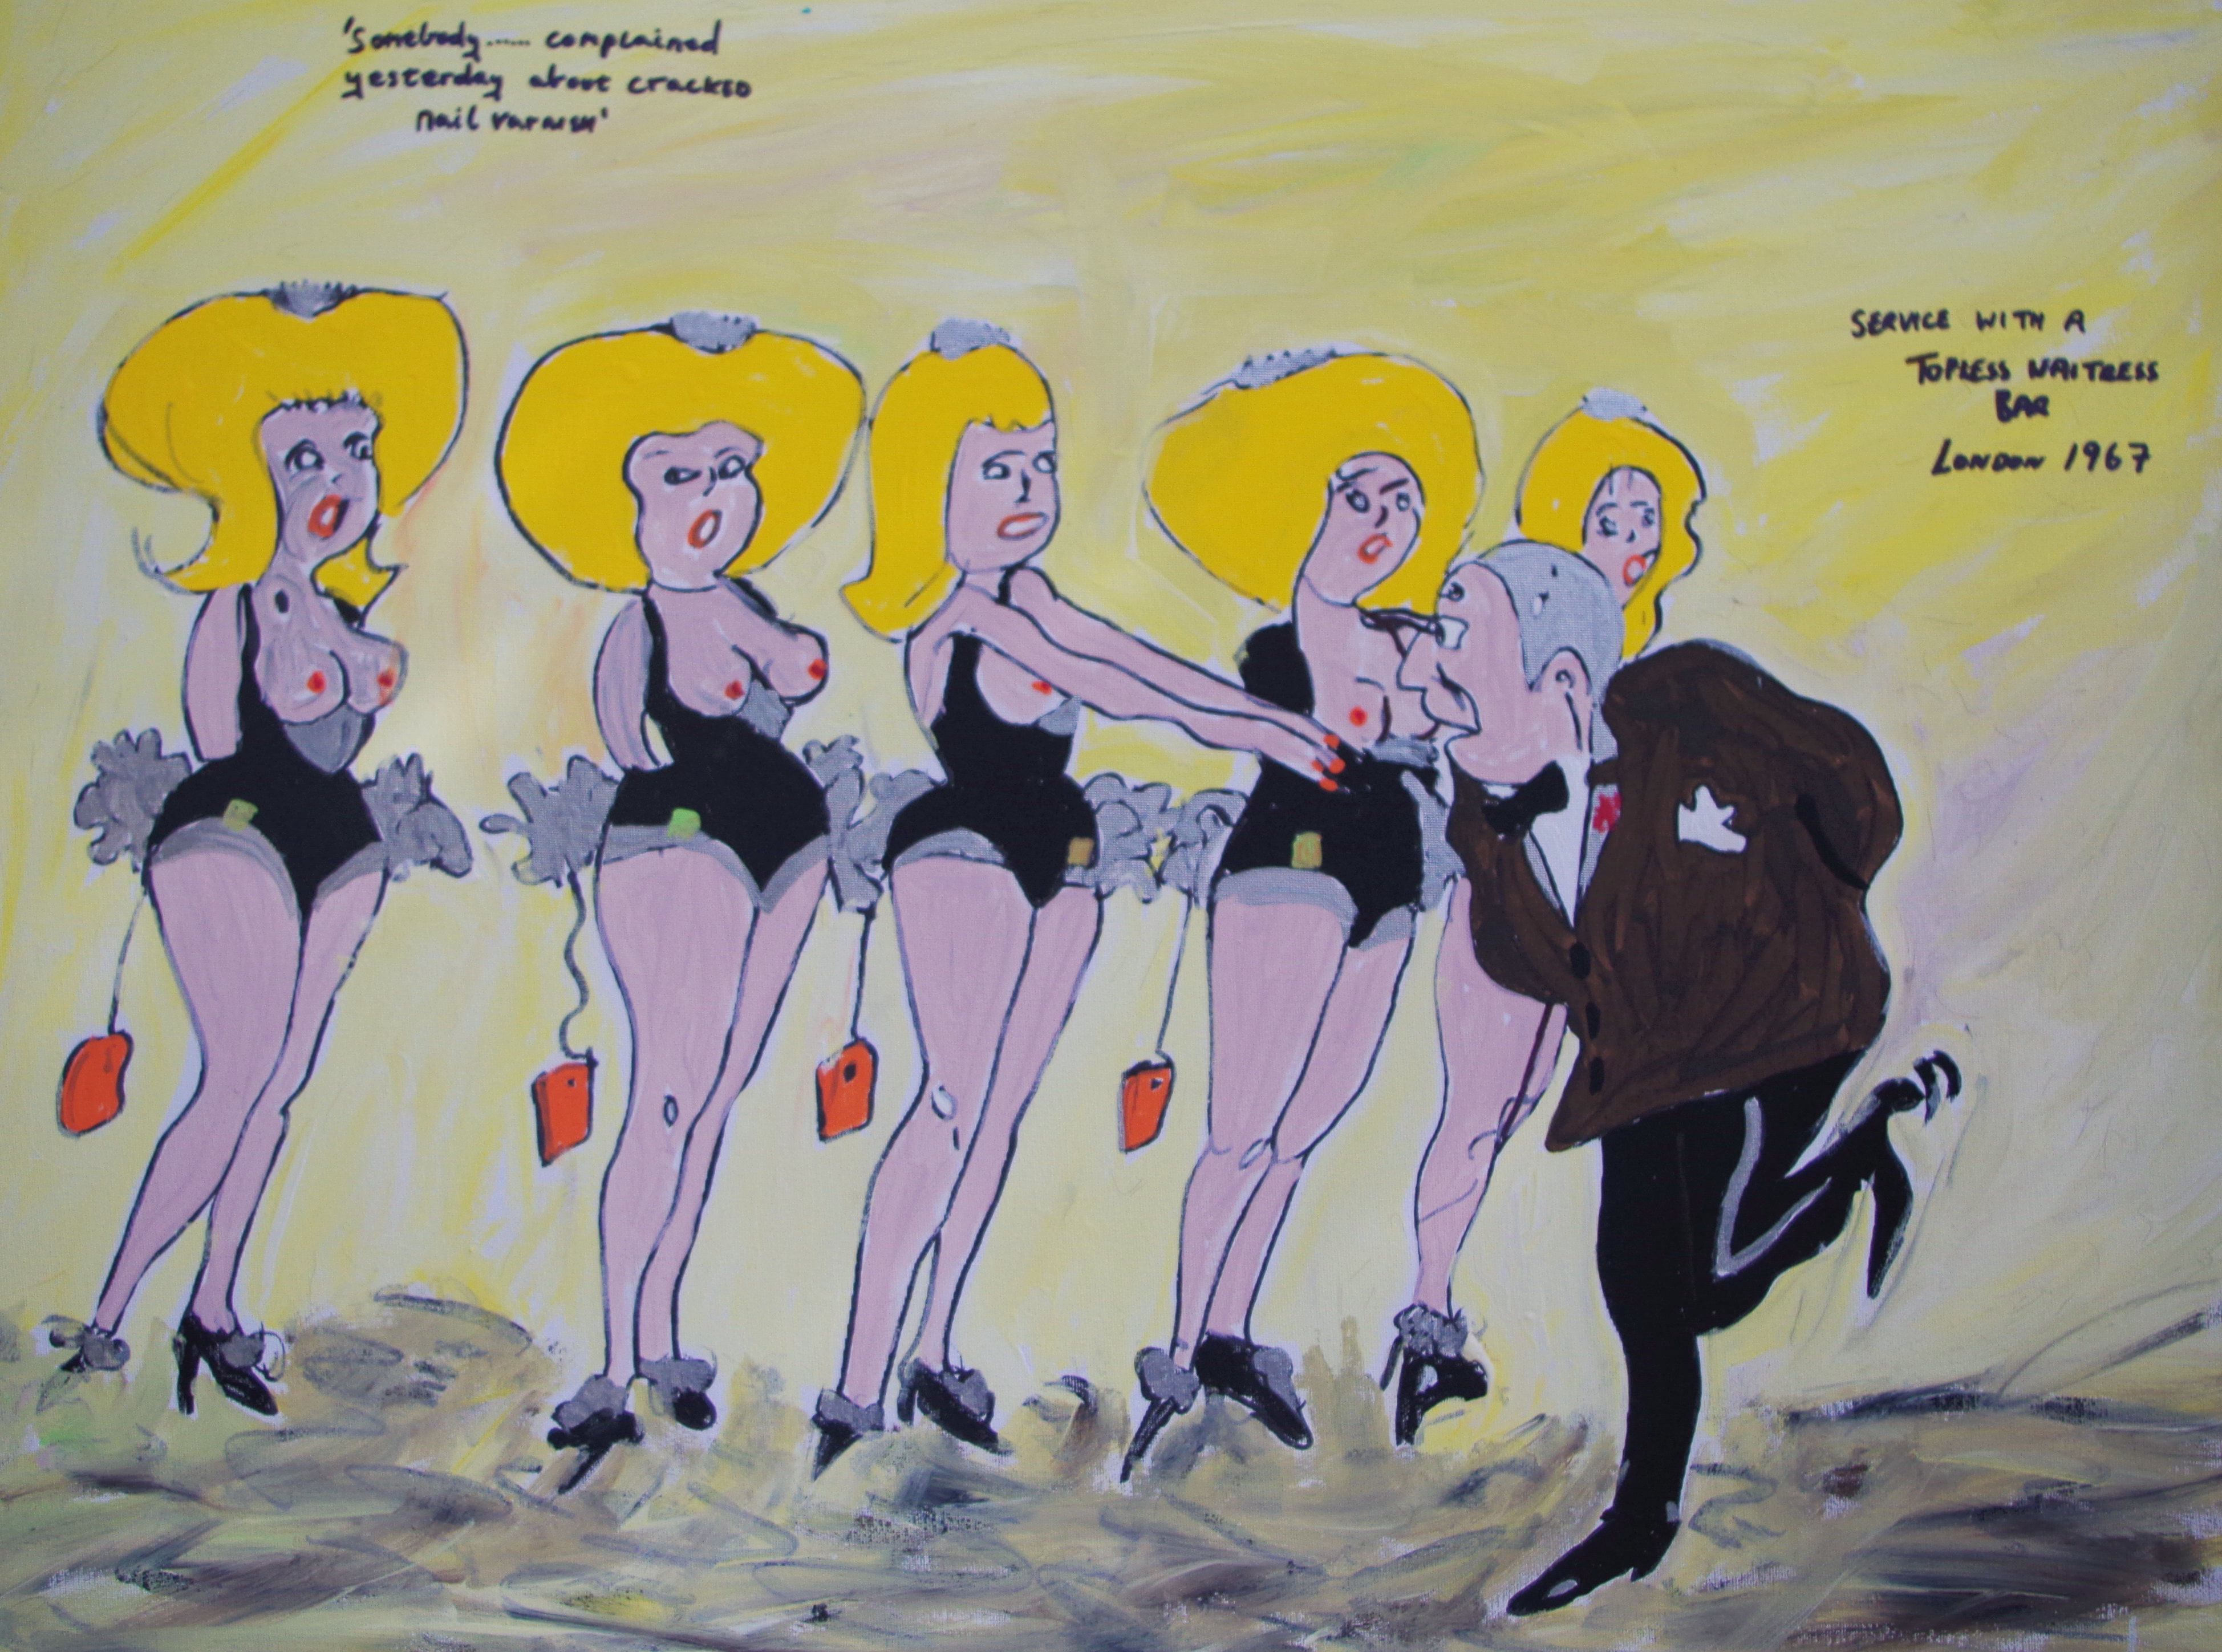 'Nails need touching up' by BB Bango based on cartoon from a 1967 Men Only Magazine 20 by 16 inch acrylic on canvas. Sold to titled art collector in UK